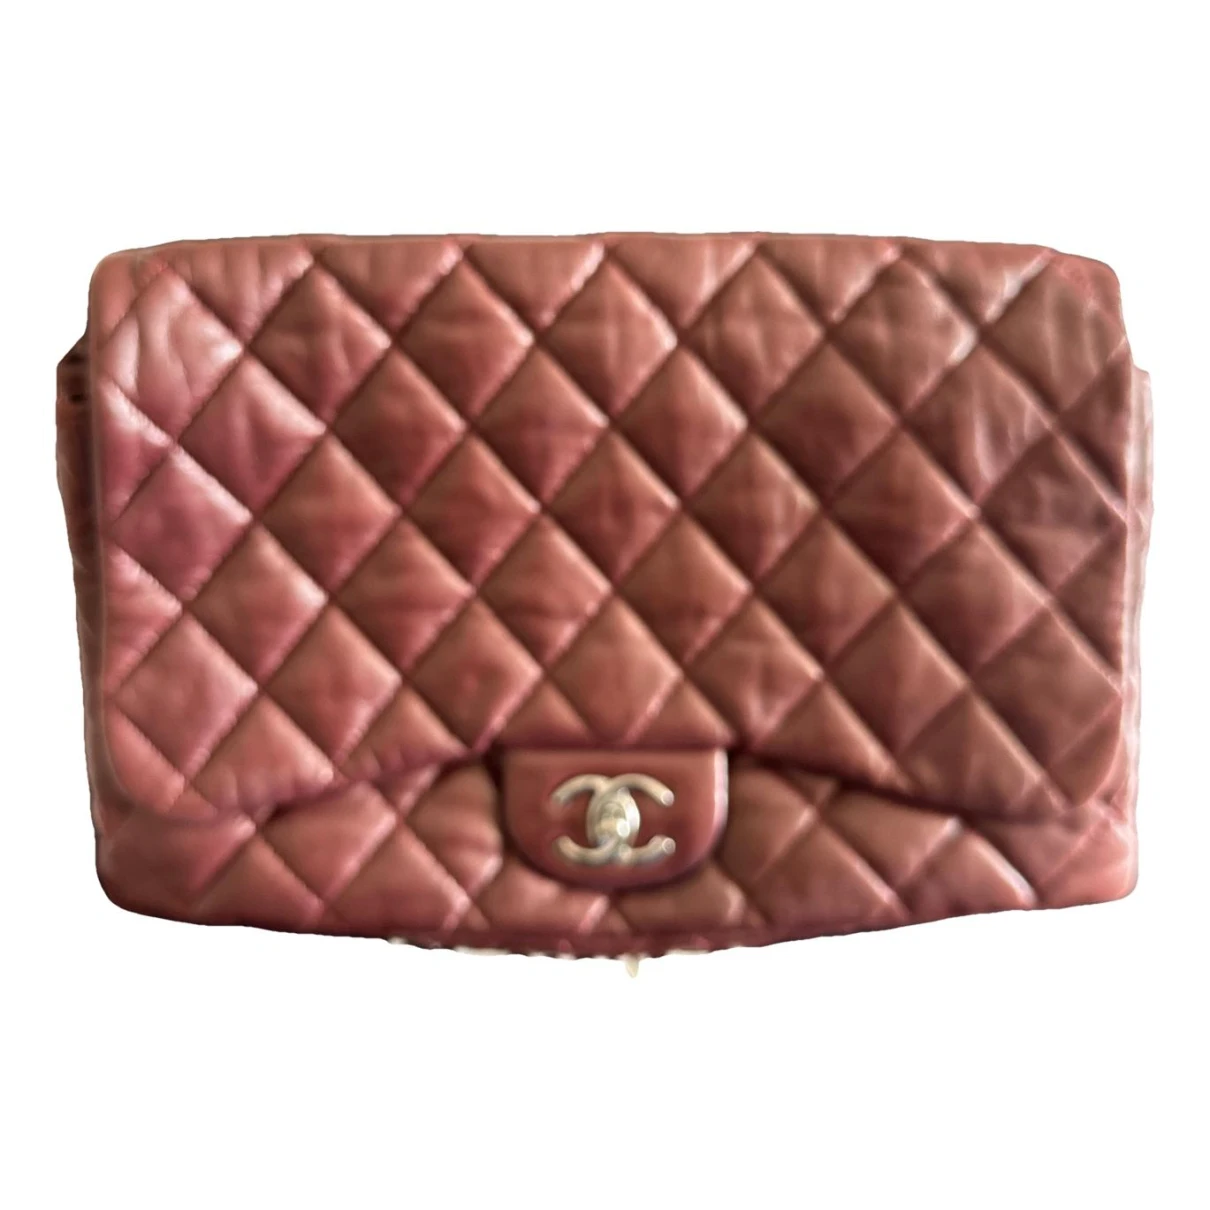 Pre-owned Chanel Timeless/classique Leather Handbag In Burgundy